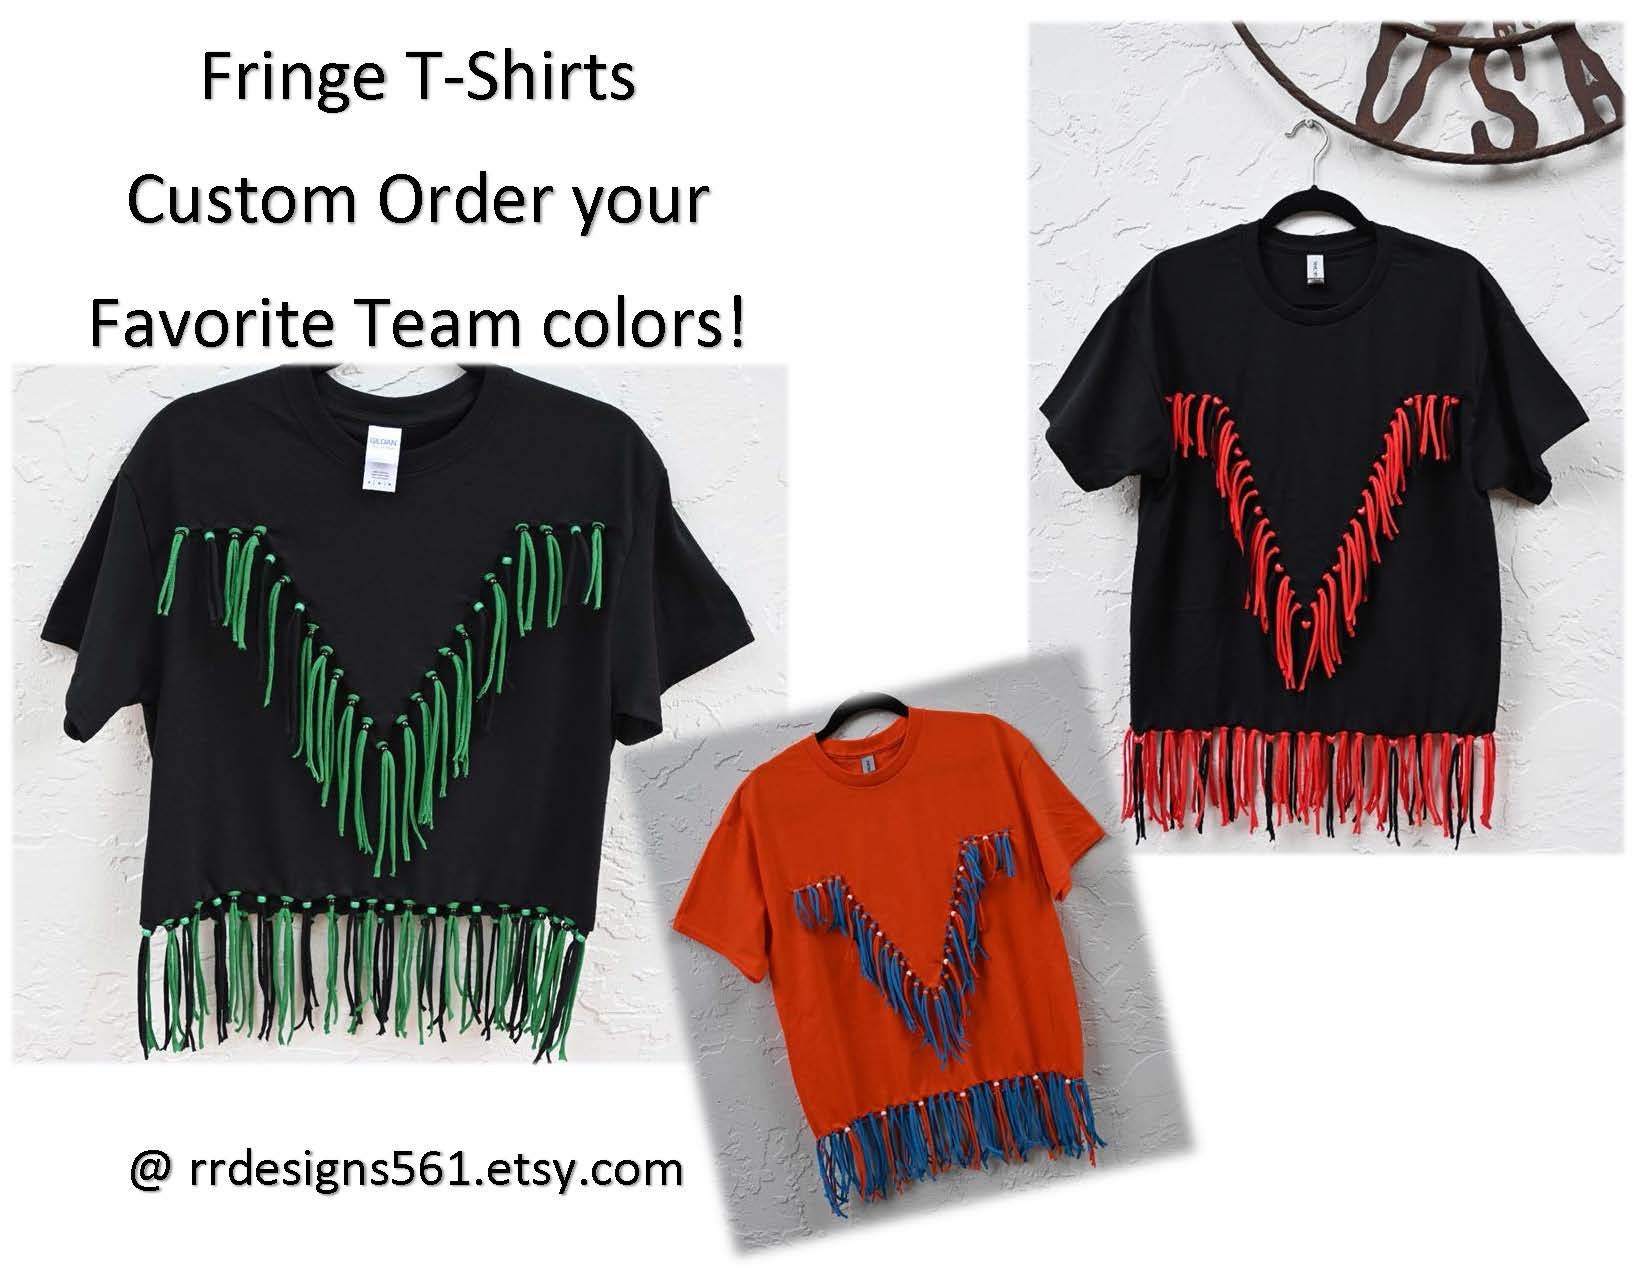 Mens Plain Long Sleeve Fringed T-shirt With Fringes Hebrew Israelite  Clothing 6 Colors Available 